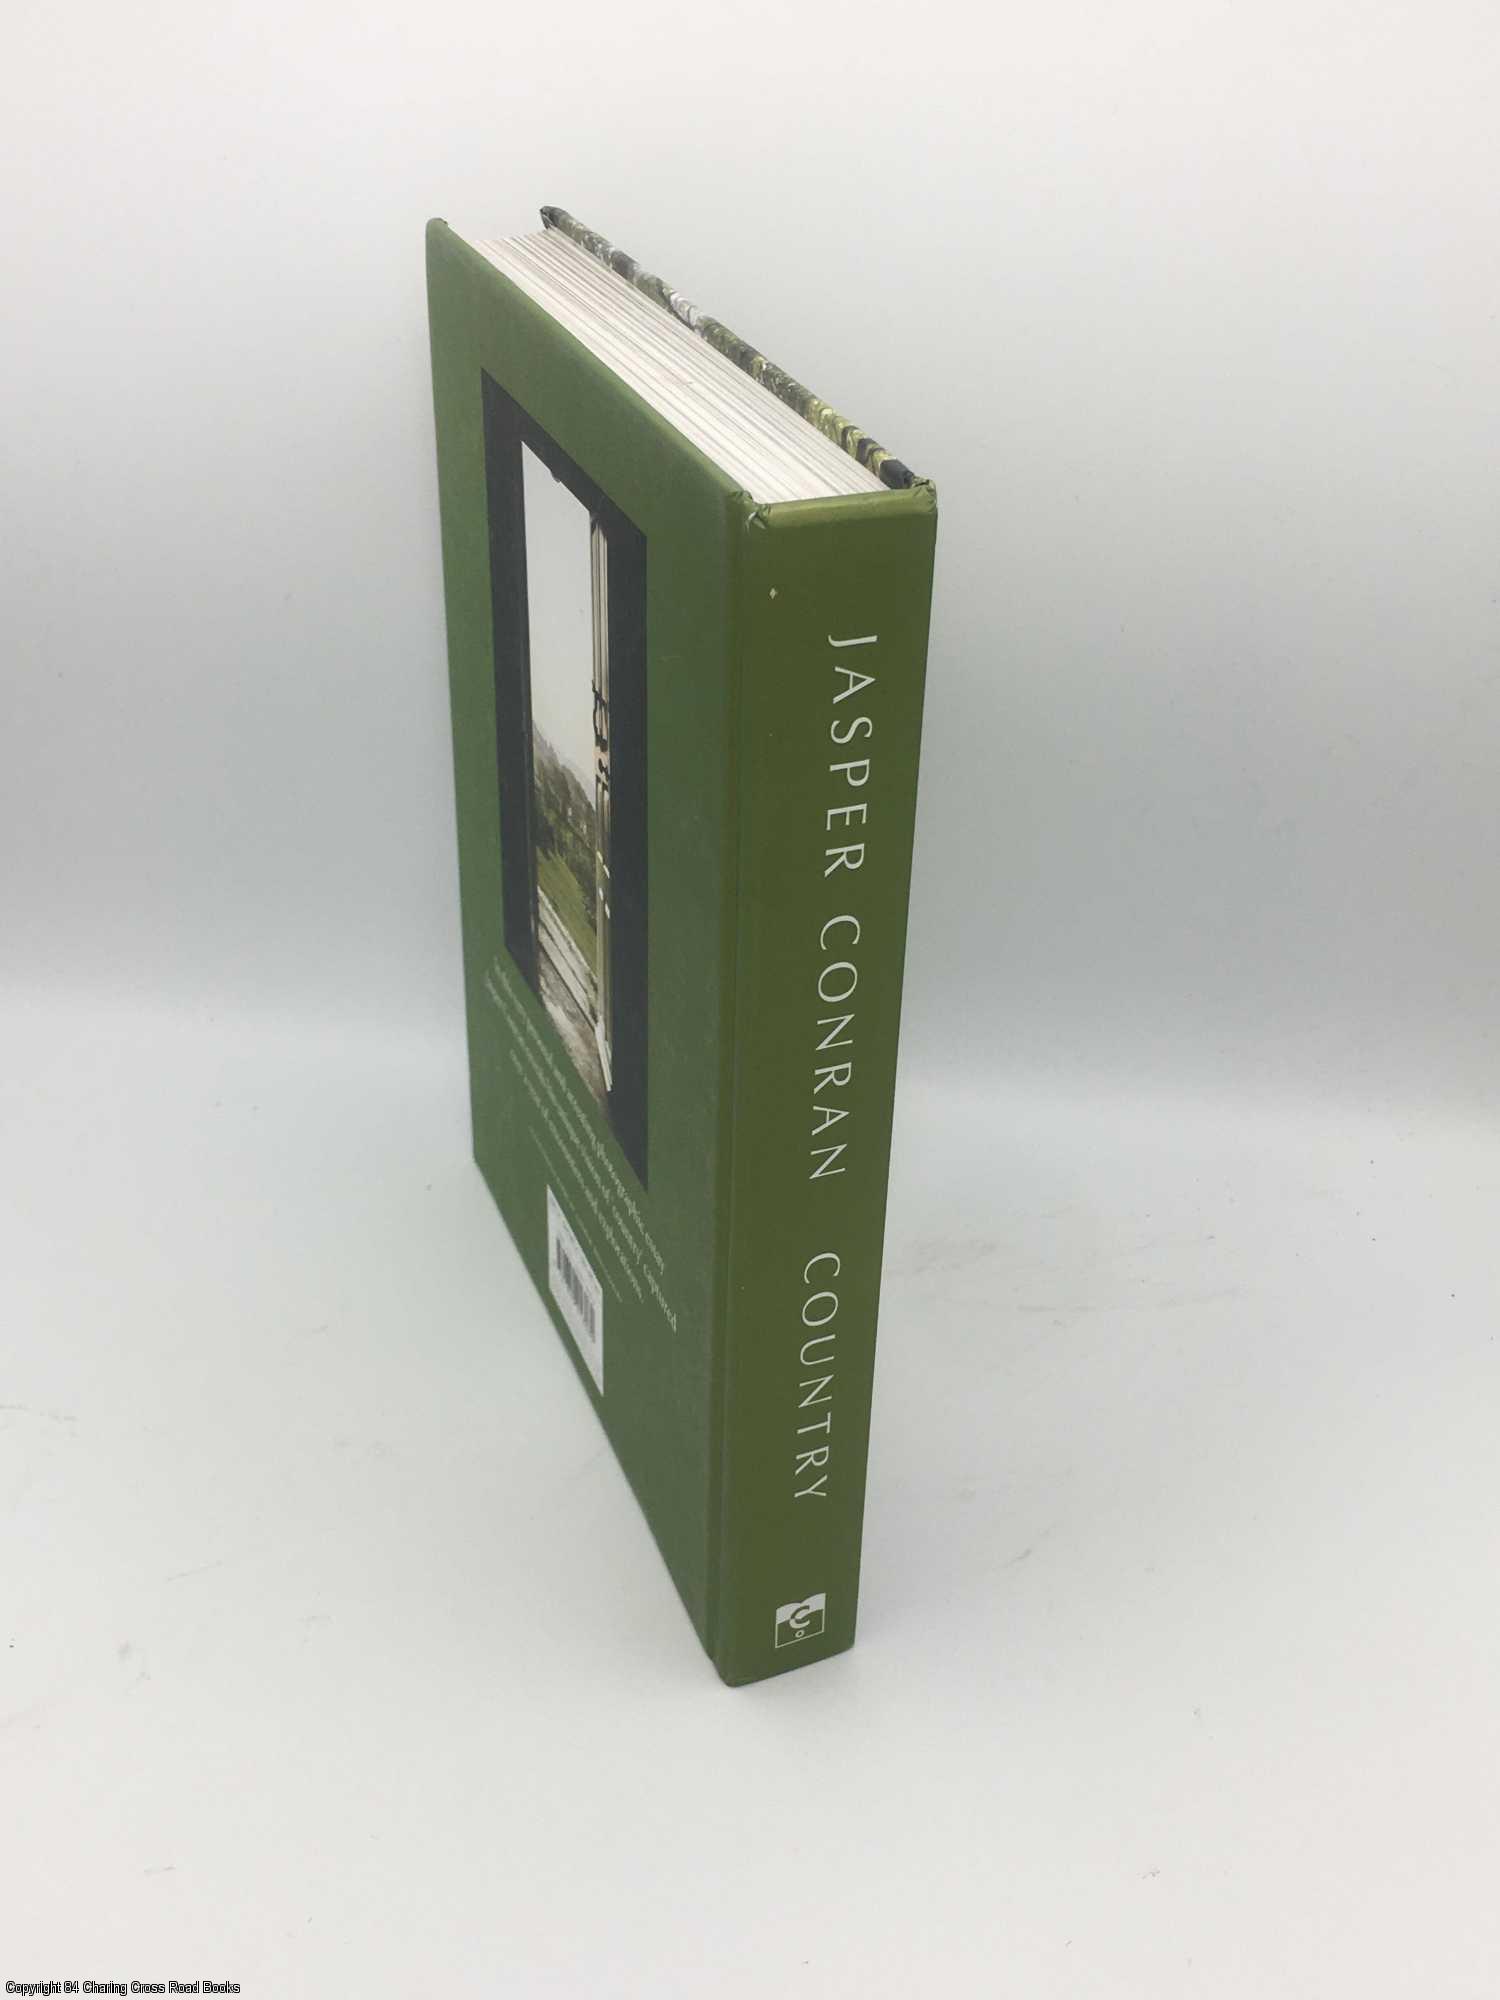 Country by Jasper Conran on 84 Charing Cross Rare Books